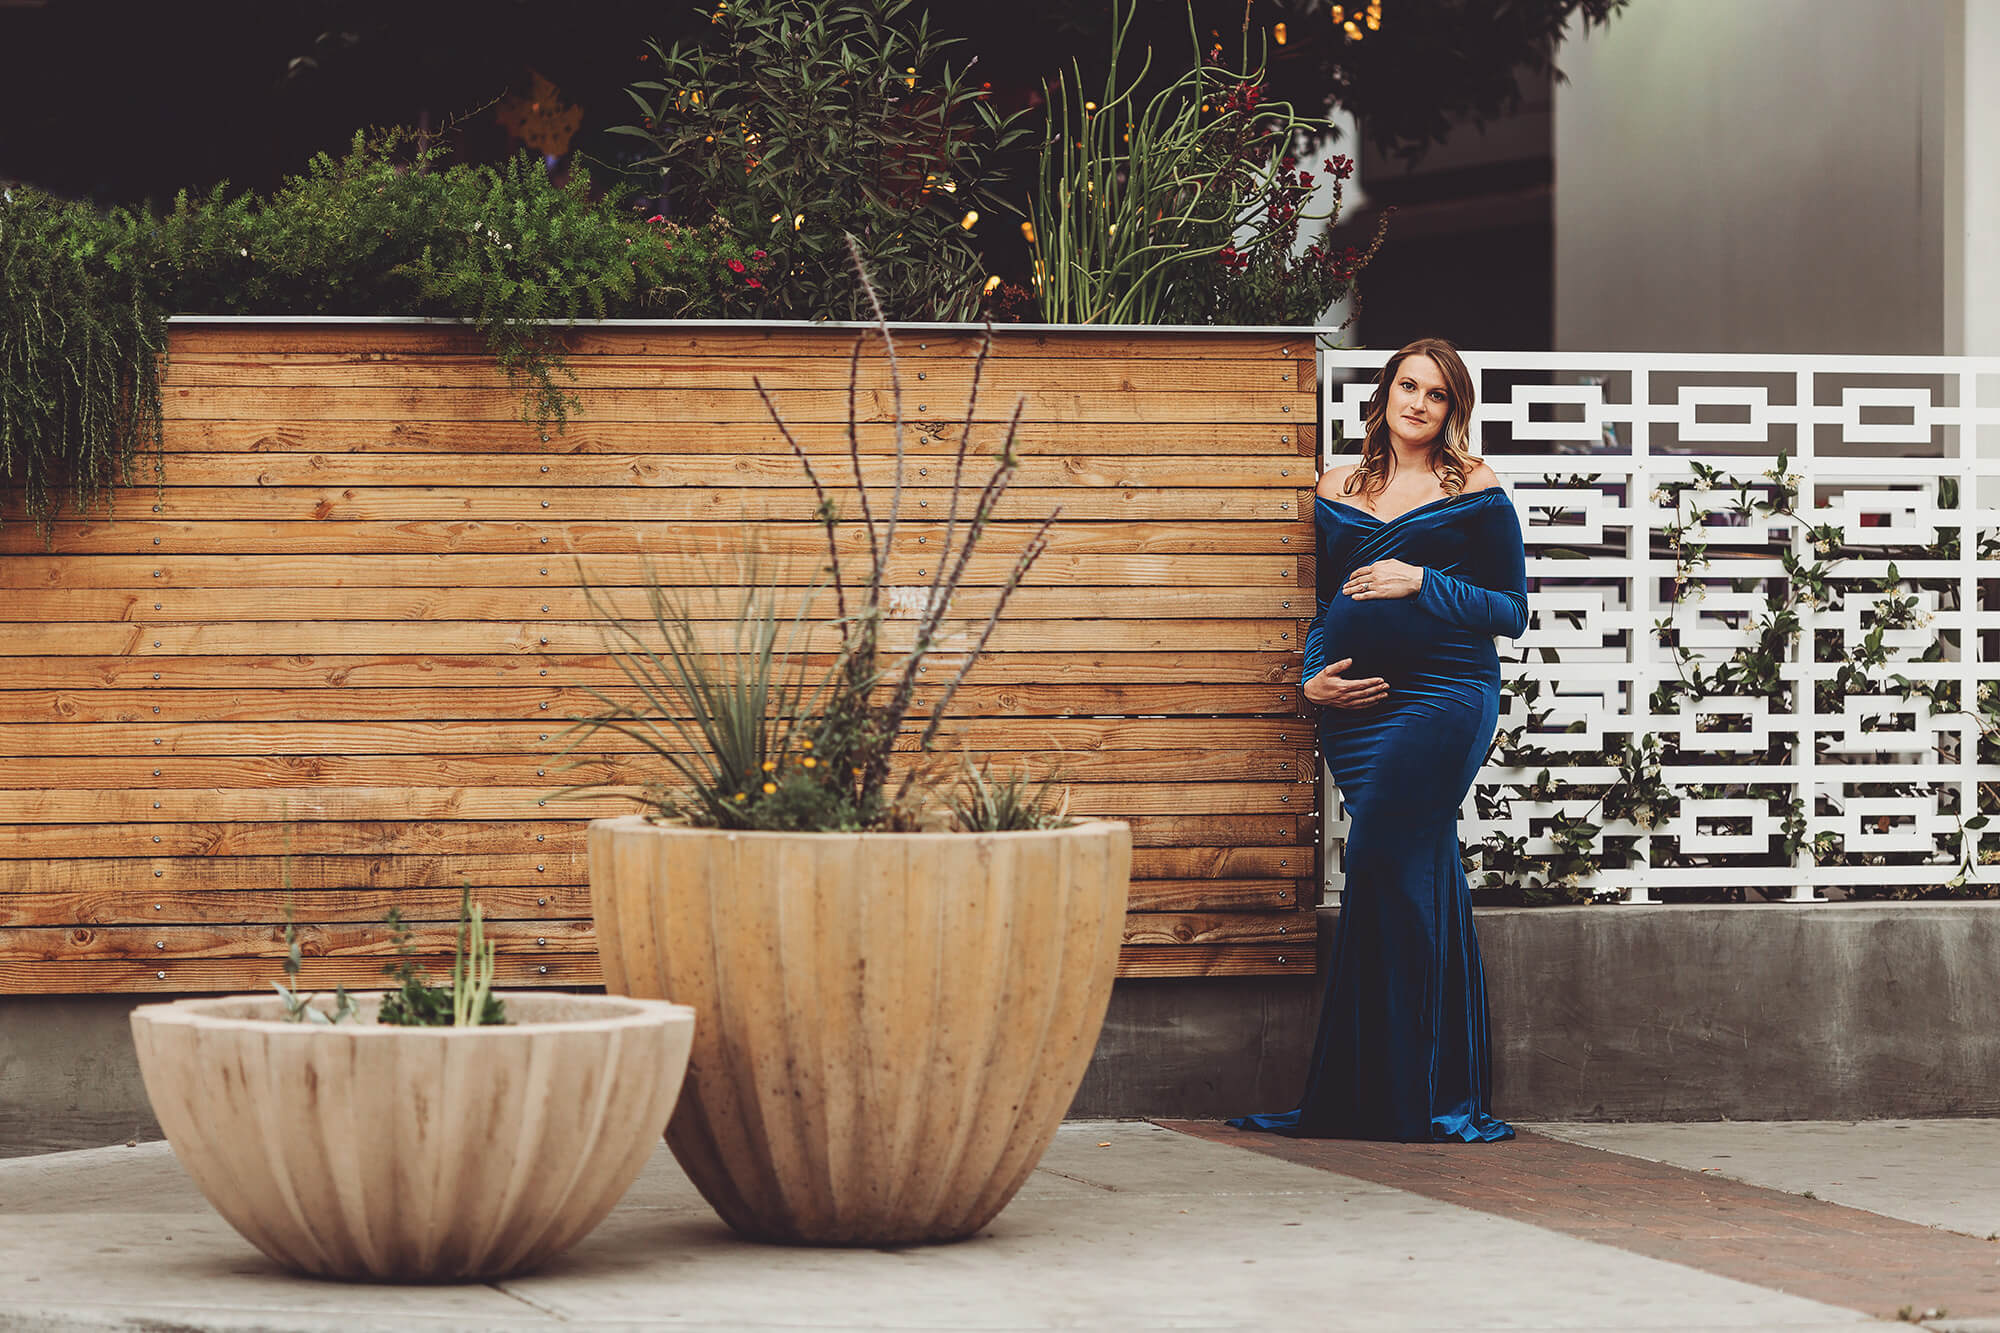 Near the Playground in Tucson, an urban maternity session